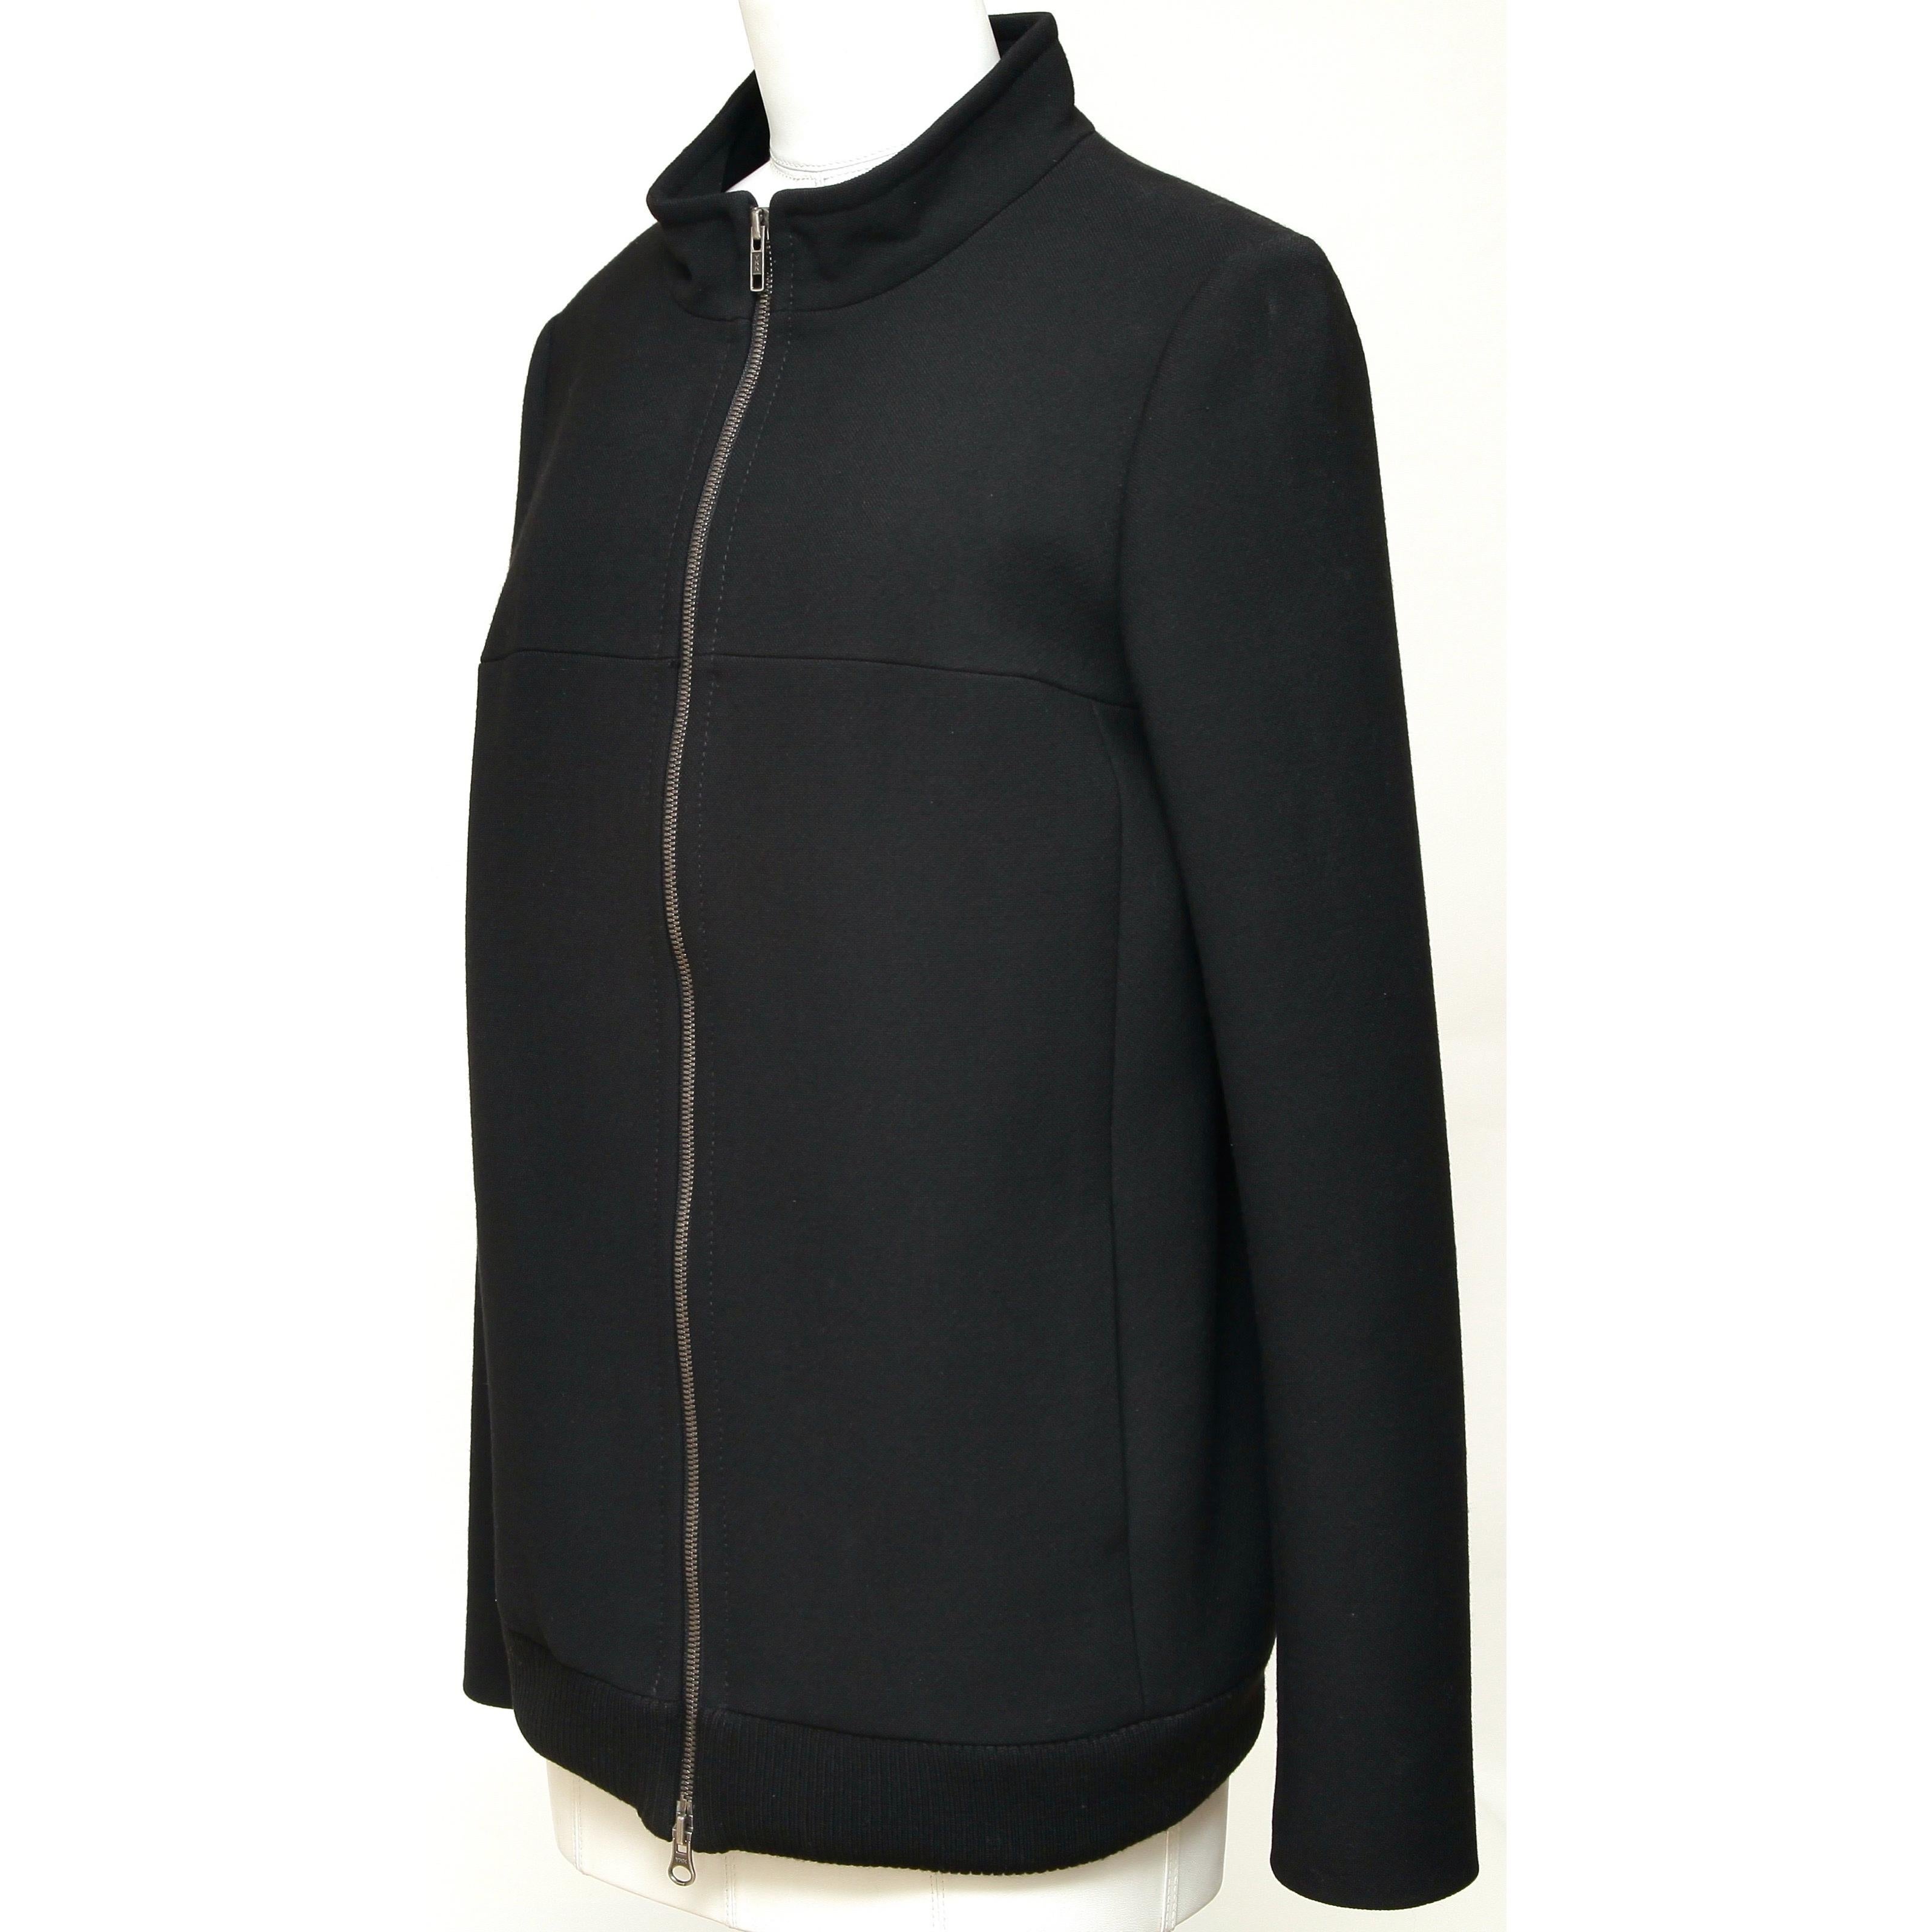 CHLOE Black Coat Jacket Long Sleeve Zipper Stand Up Collar Sz 36 2007 In Excellent Condition For Sale In Hollywood, FL